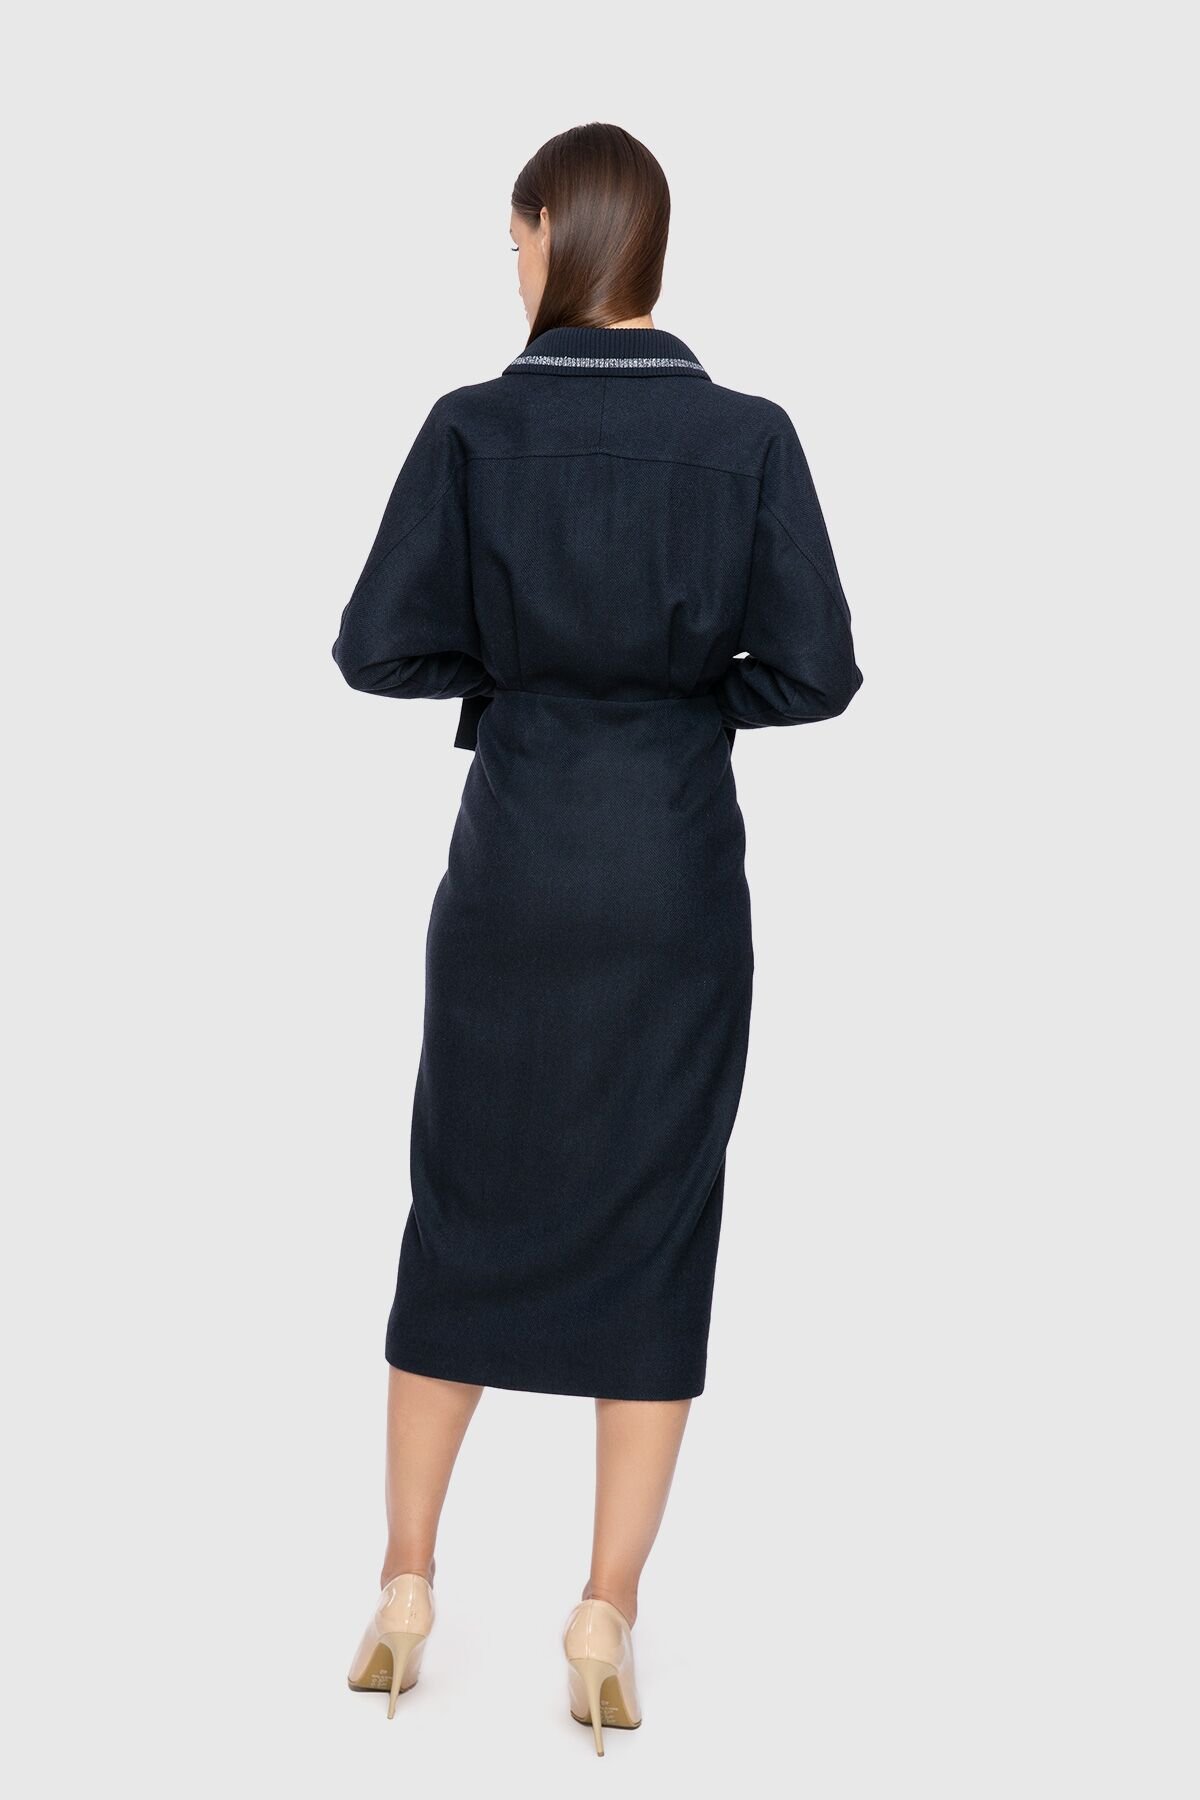 Embroidered Collar Detailed Wool Fabric Midi Length Navy Blue Dress